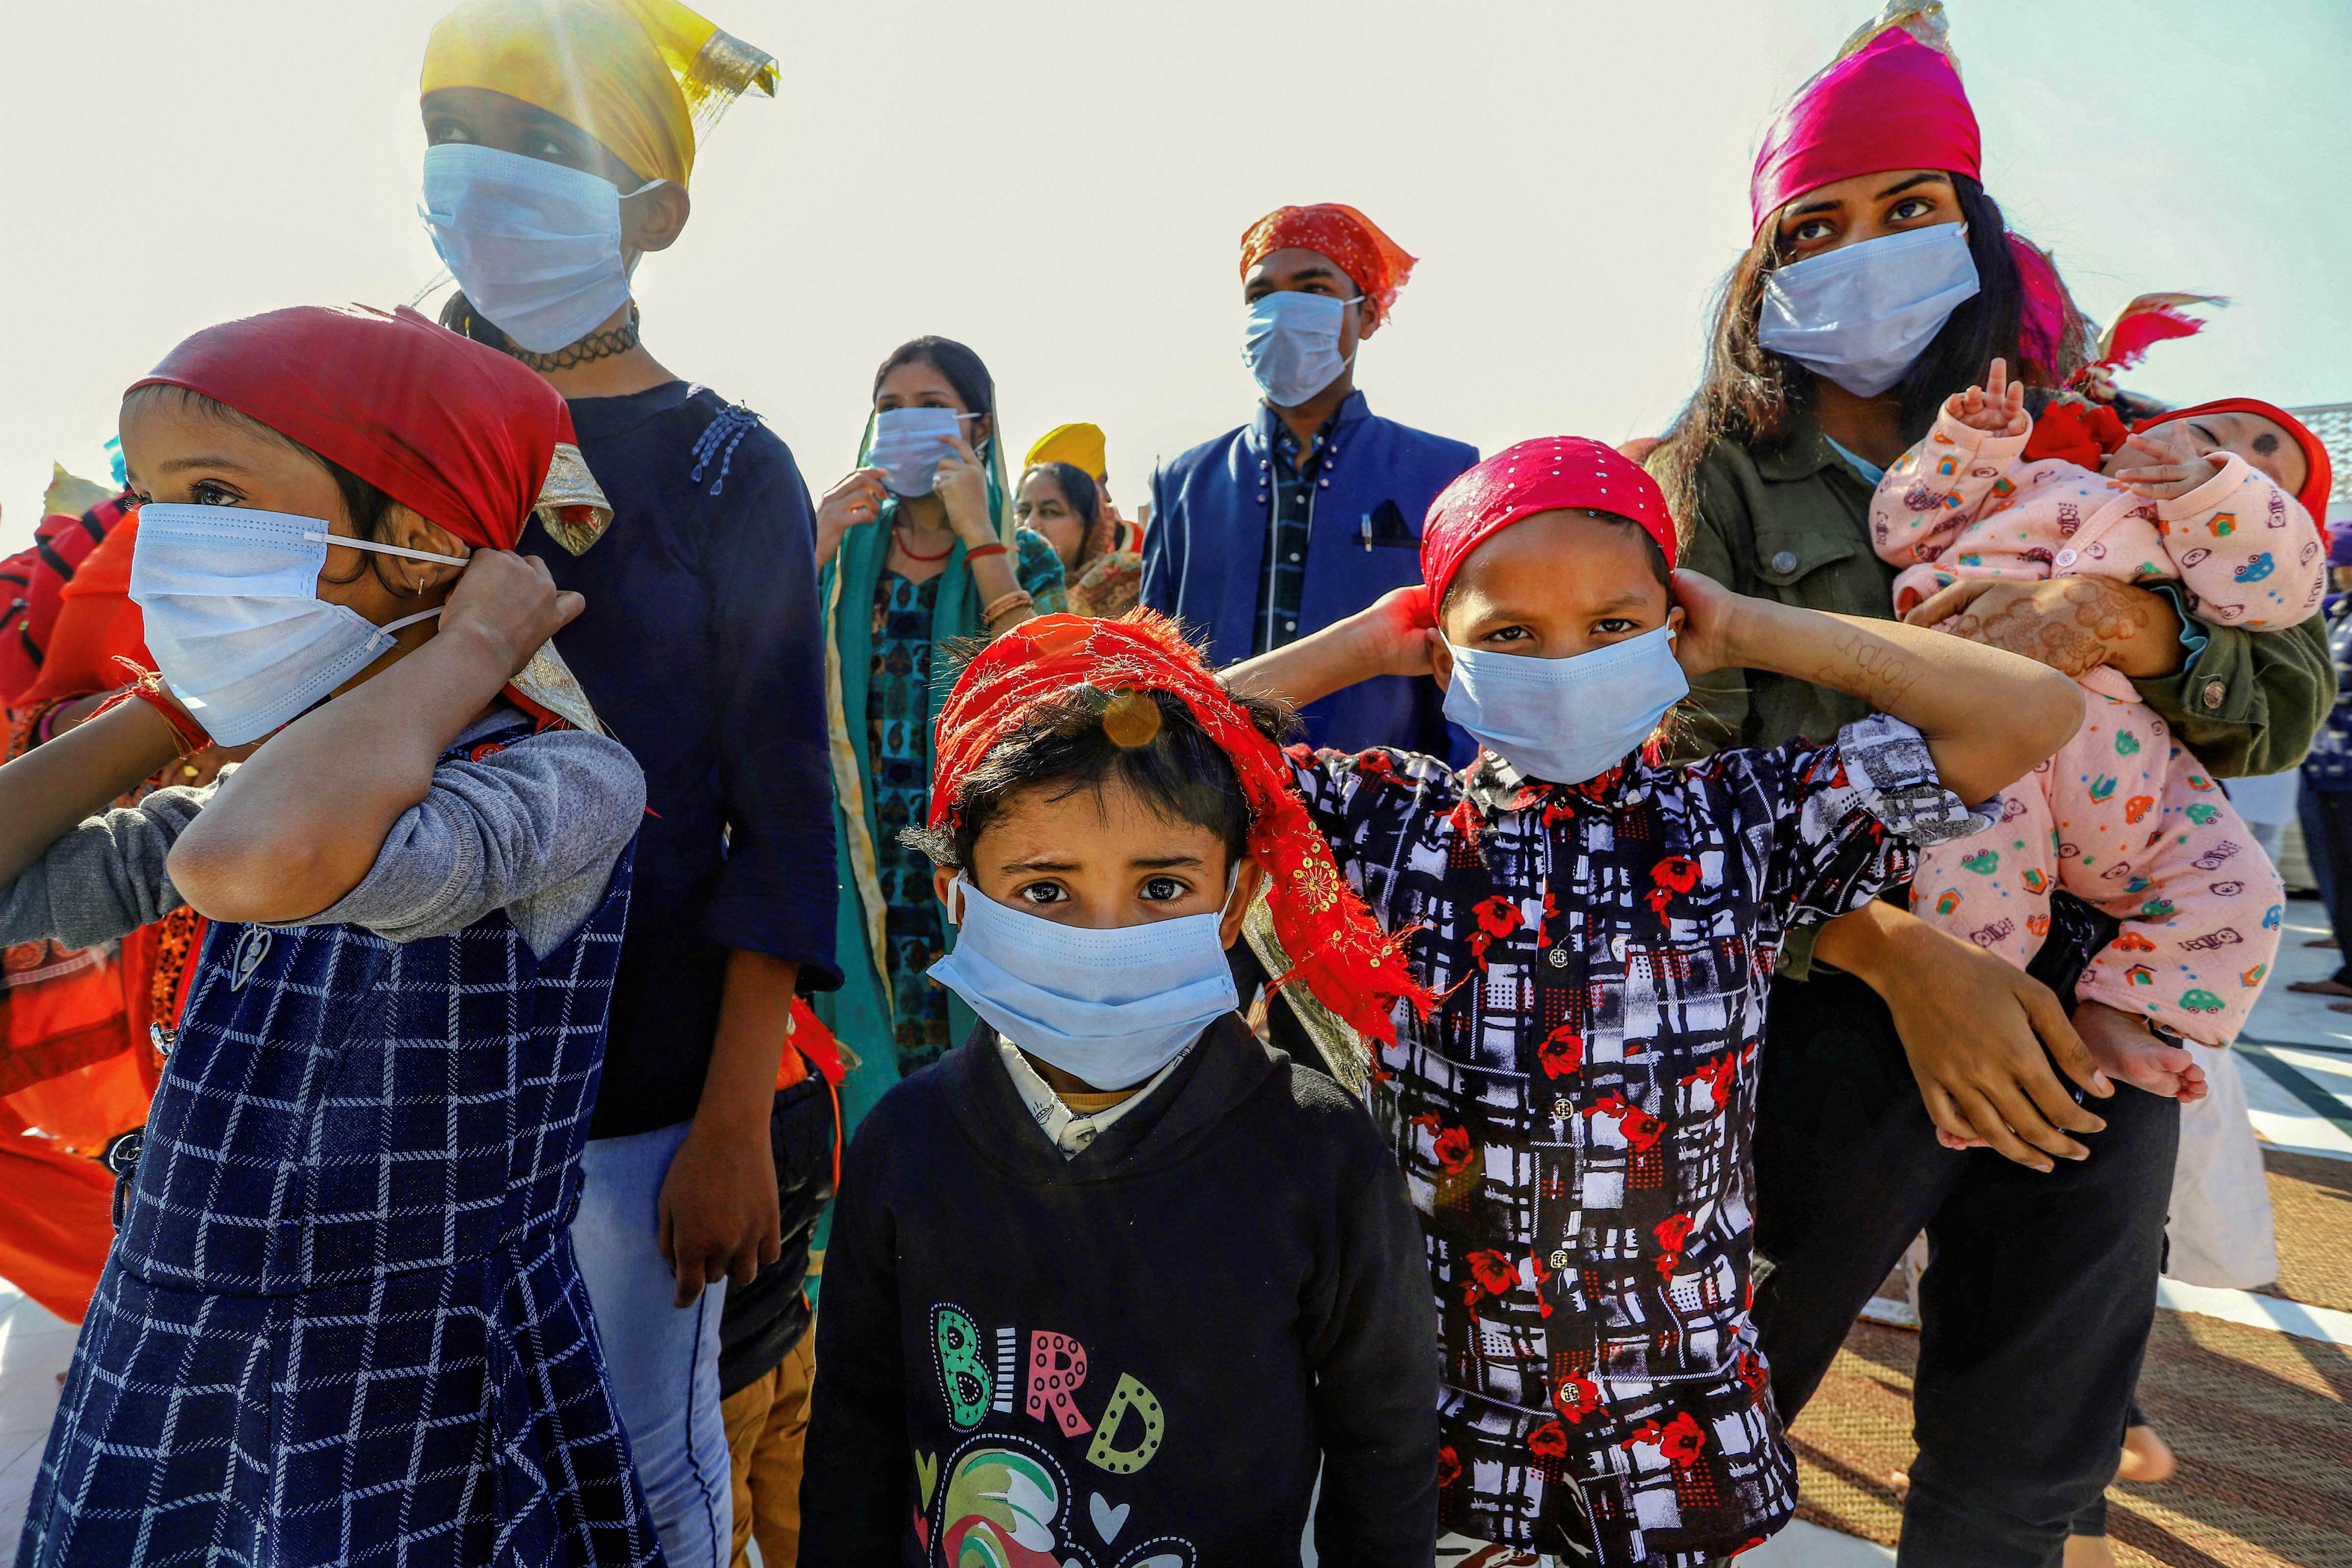 People wear protective masks during a campaign by Delhi Sikh Gurudwara Management Committee to distribute masks in the wake of novel coronavirus scare in New Delhi, Sunday, March 8, 2020